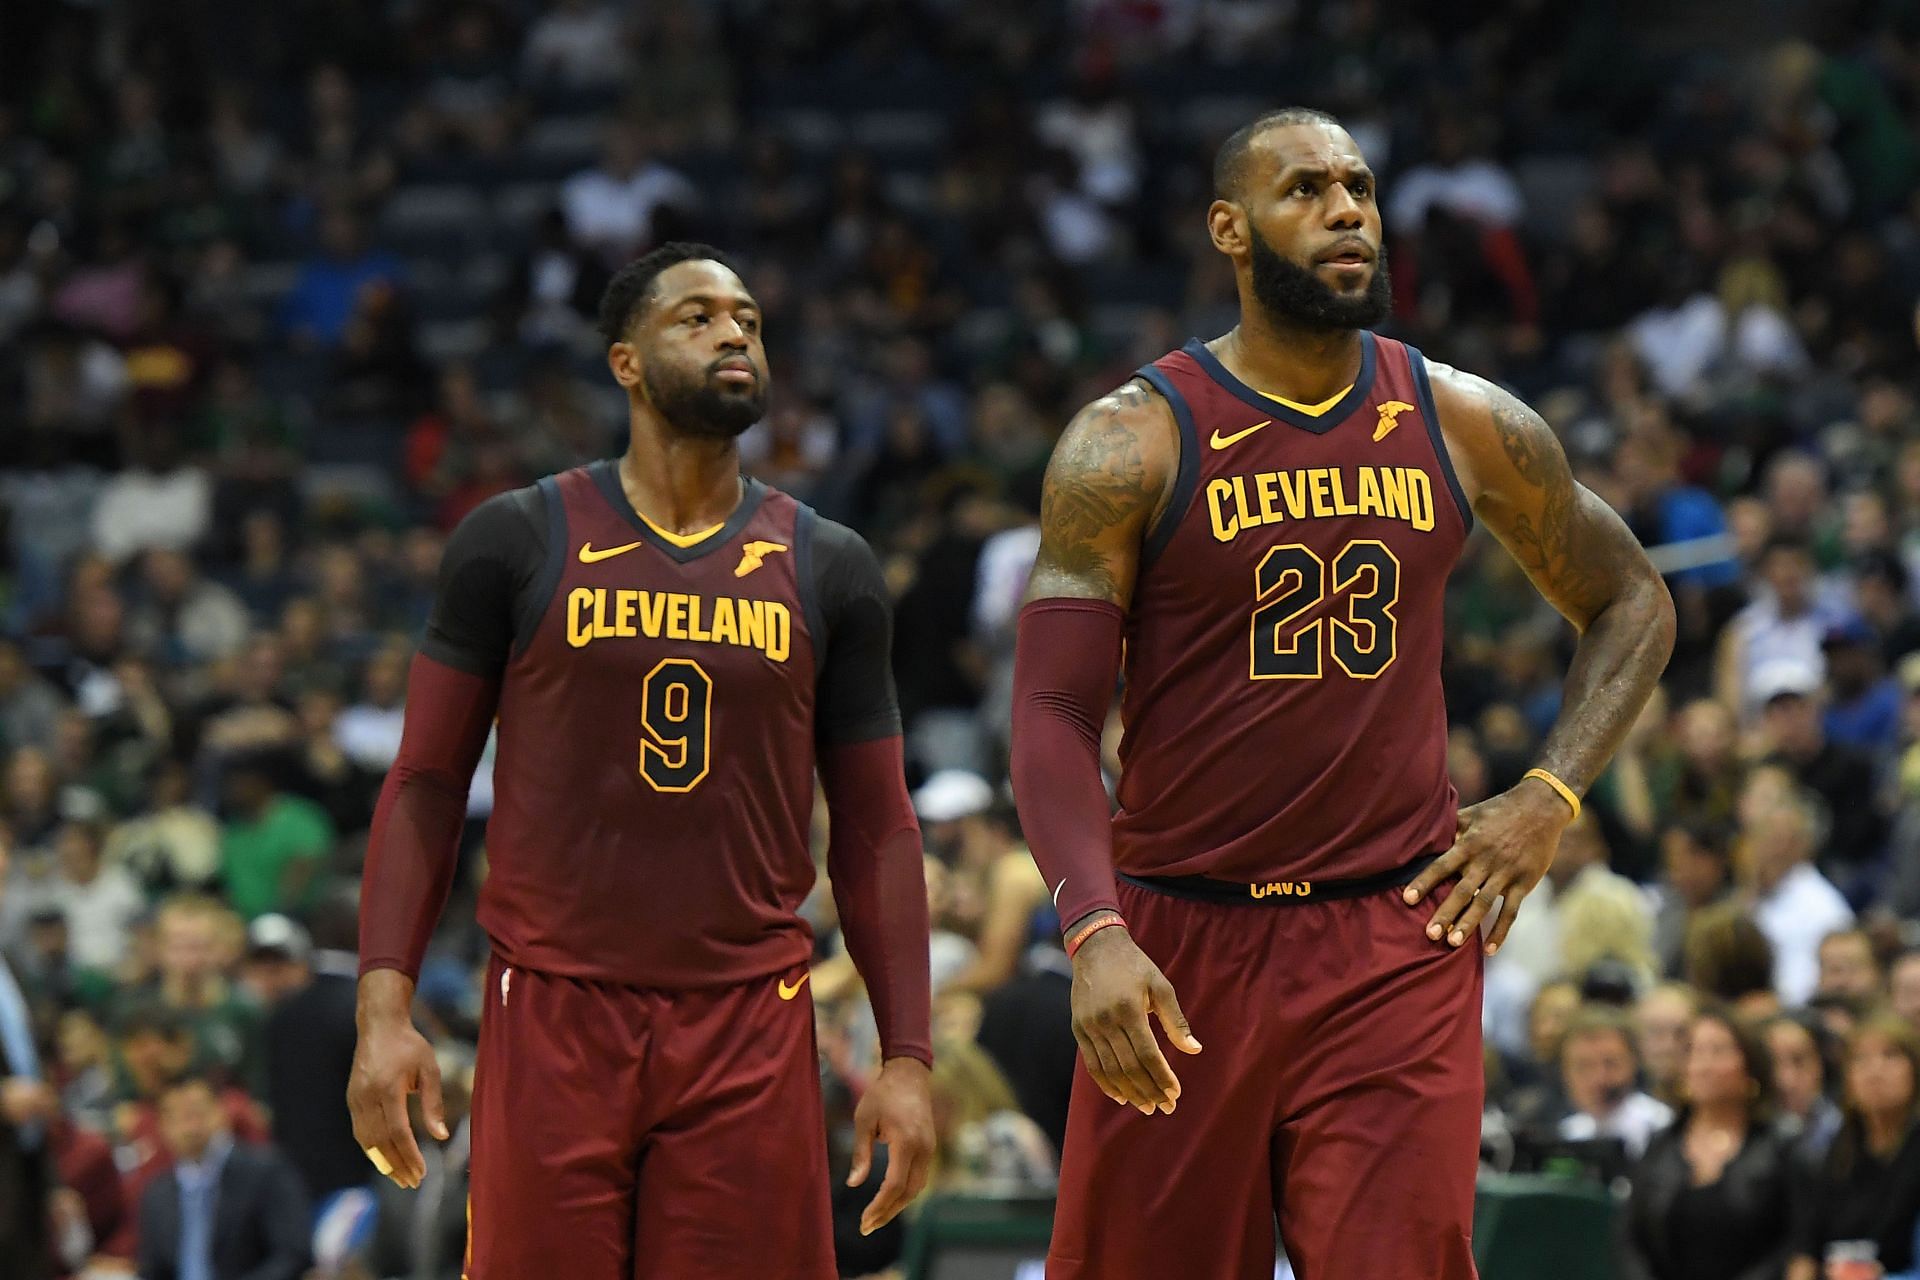 Dwyane Wade and LeBron James (right) with the Cleveland Cavaliers